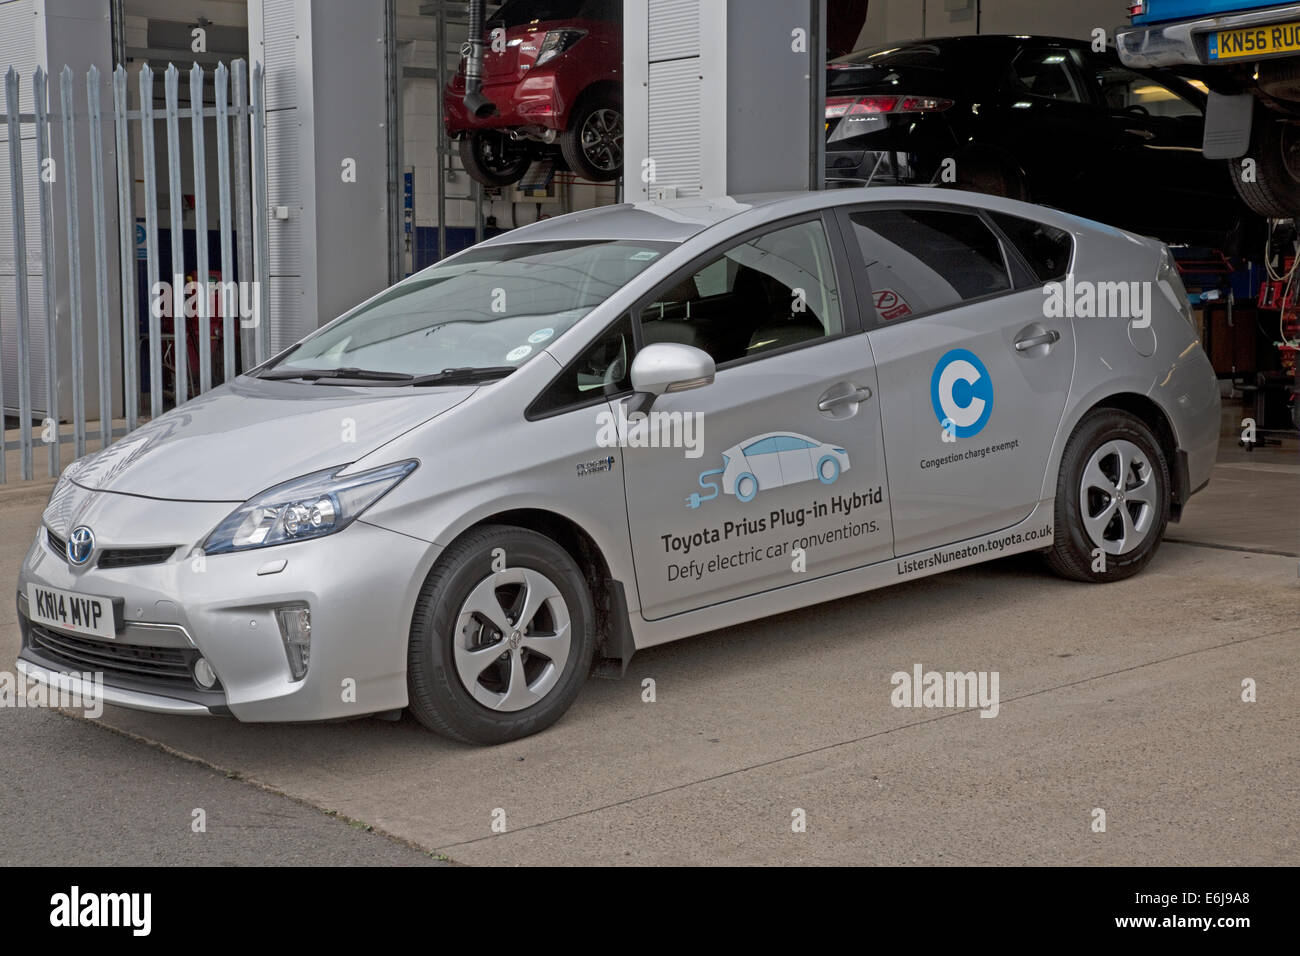 Toyota Prius Plug In OLEV ultra low emission mid-size plug-in hybrid electric vehicle parked Stock Photo